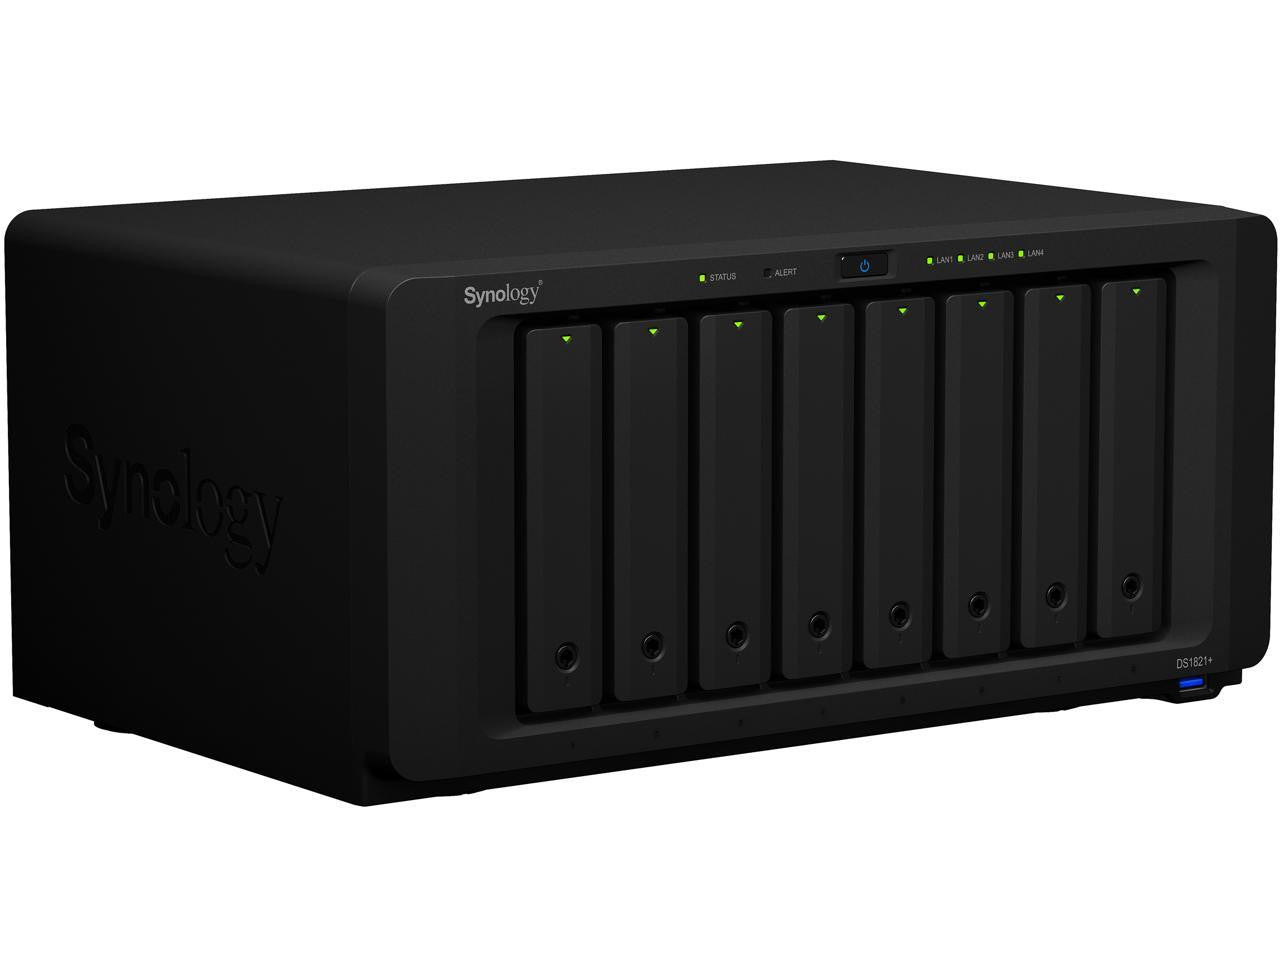 Synology DS1821+ 8-BAY DiskStation with 4GB RAM, 800GB (2x400GB) Cache and 128TB (8 x 16TB) of Synology Enterprise HAT5300 Drives Fully Assembled and Tested